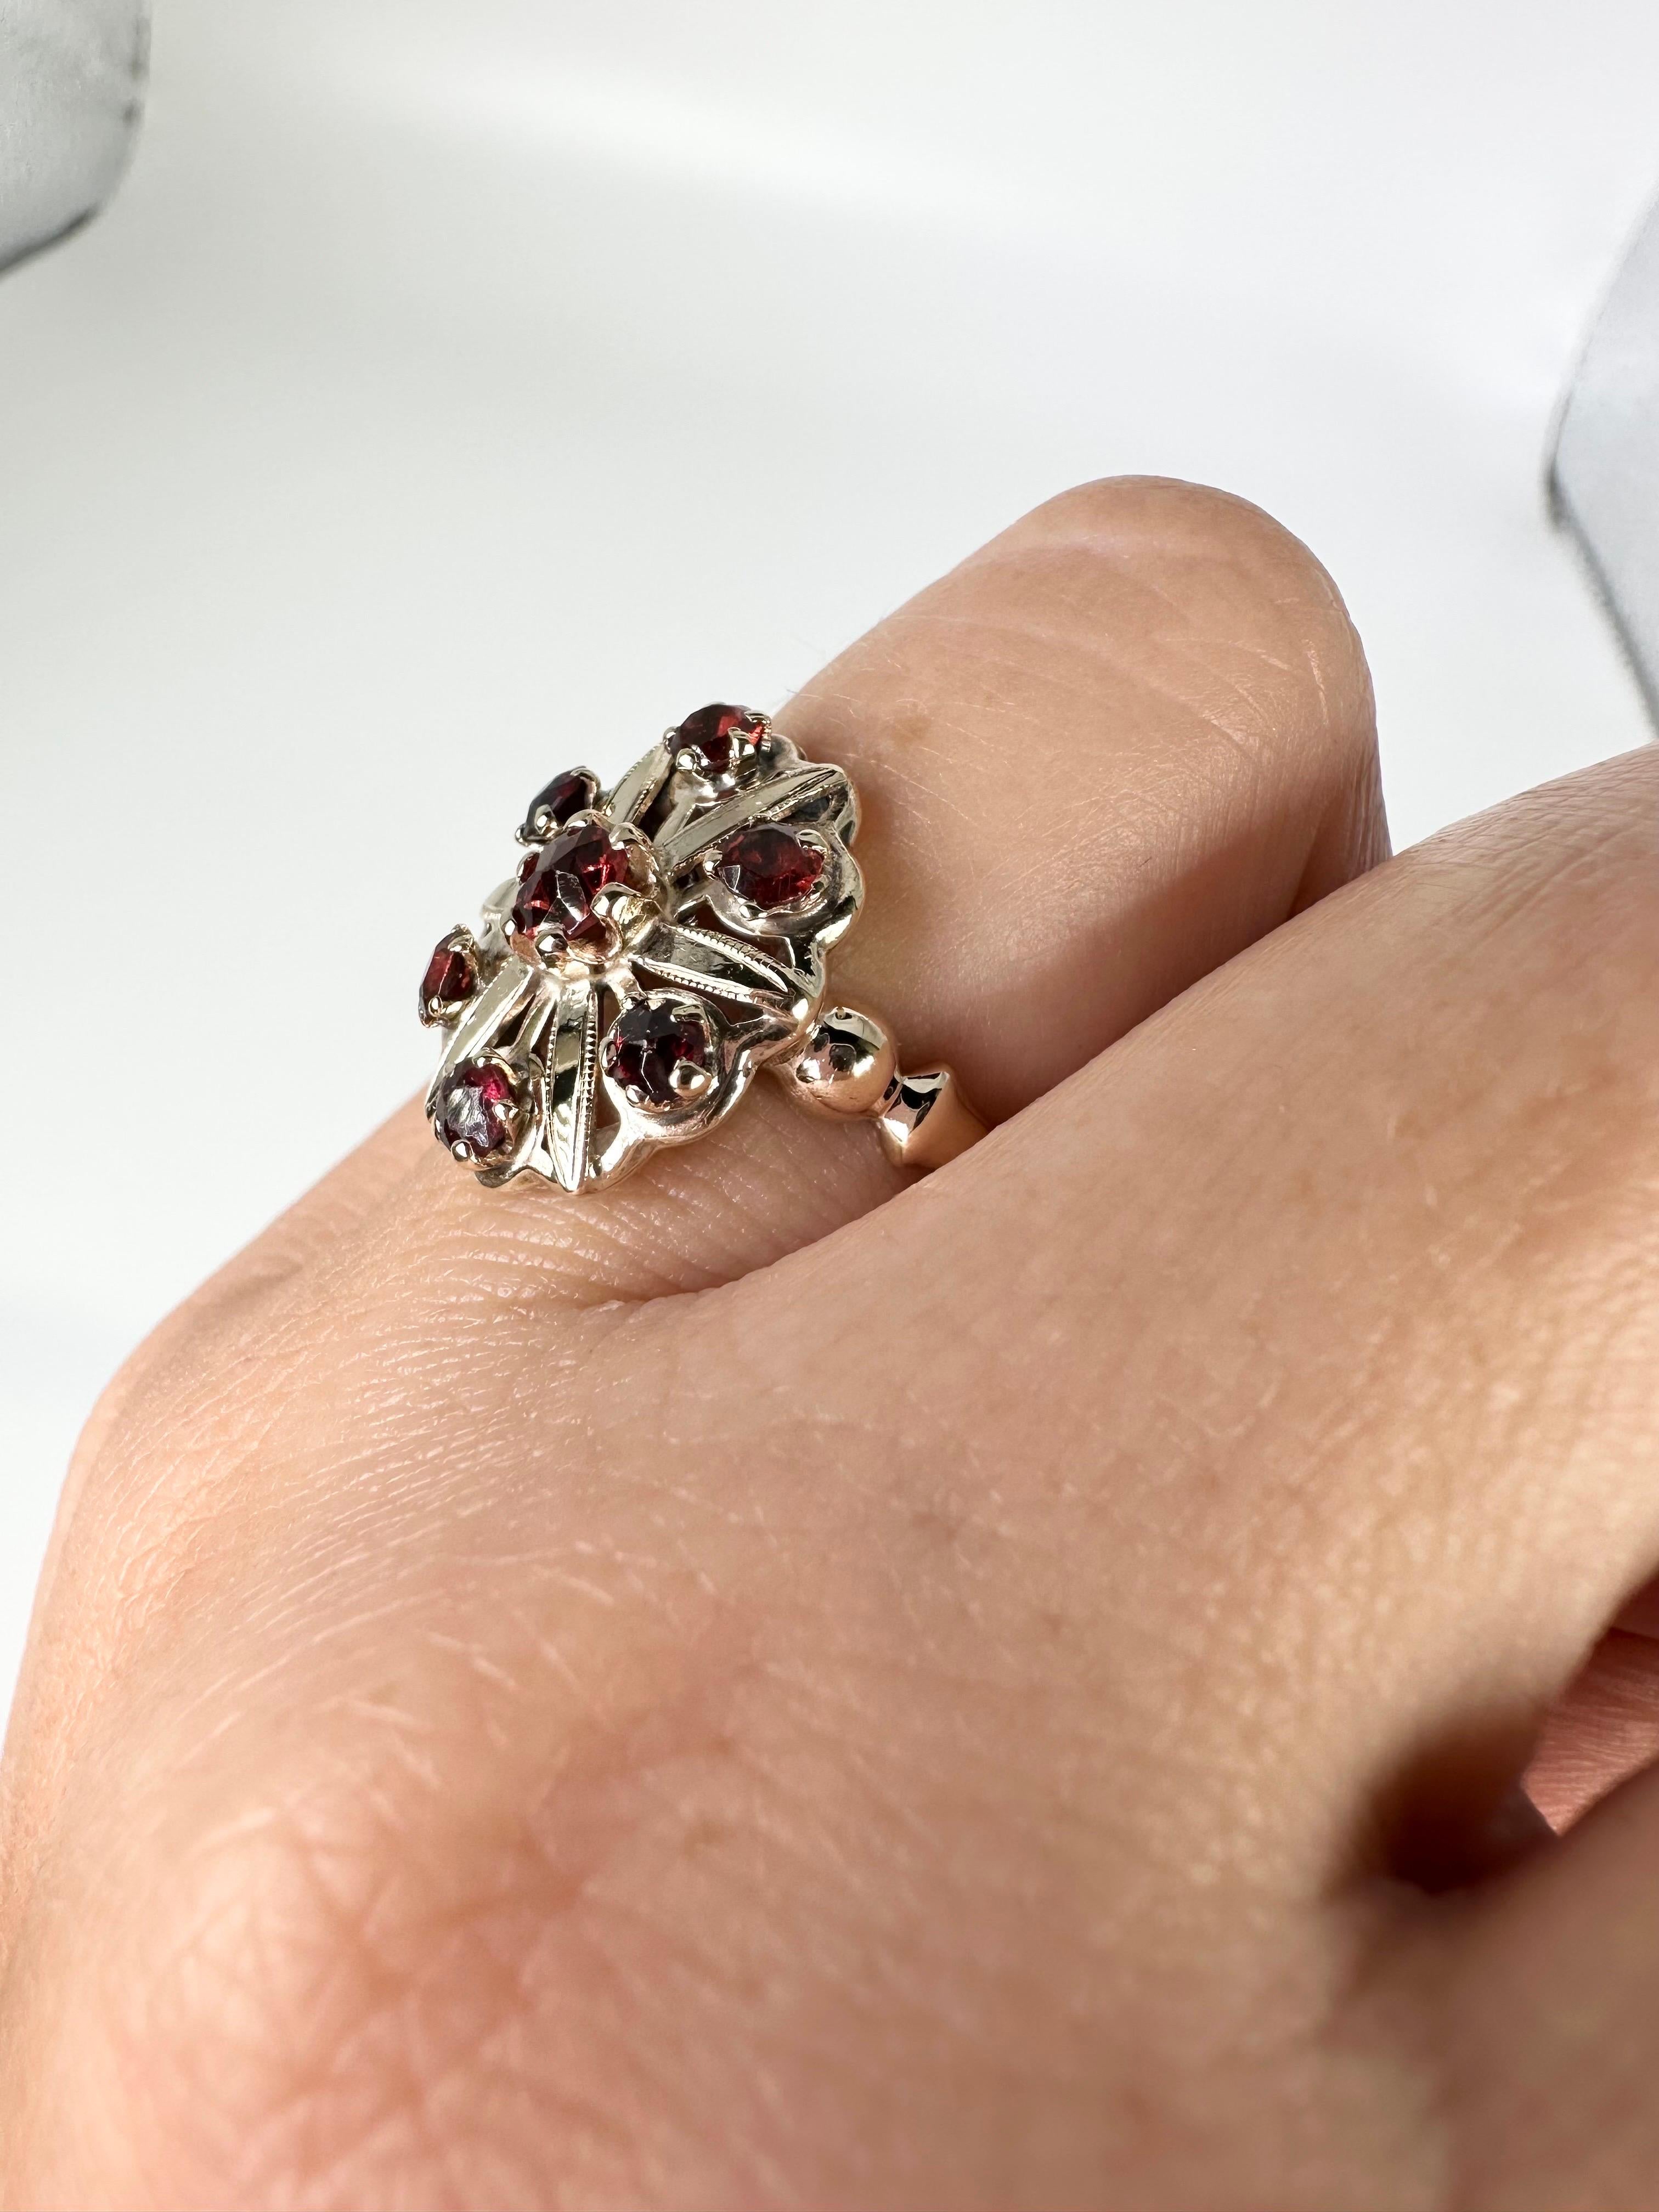 Vintage garnet rign made in cocktail style with stunning red garnets! The ring is made in 14KT yellow gold with delicate filigree artwork on the ring.
GOLD: 14KT gold
NATURAL garnet(S)
Clarity/Color: Slightly Included/Brownish